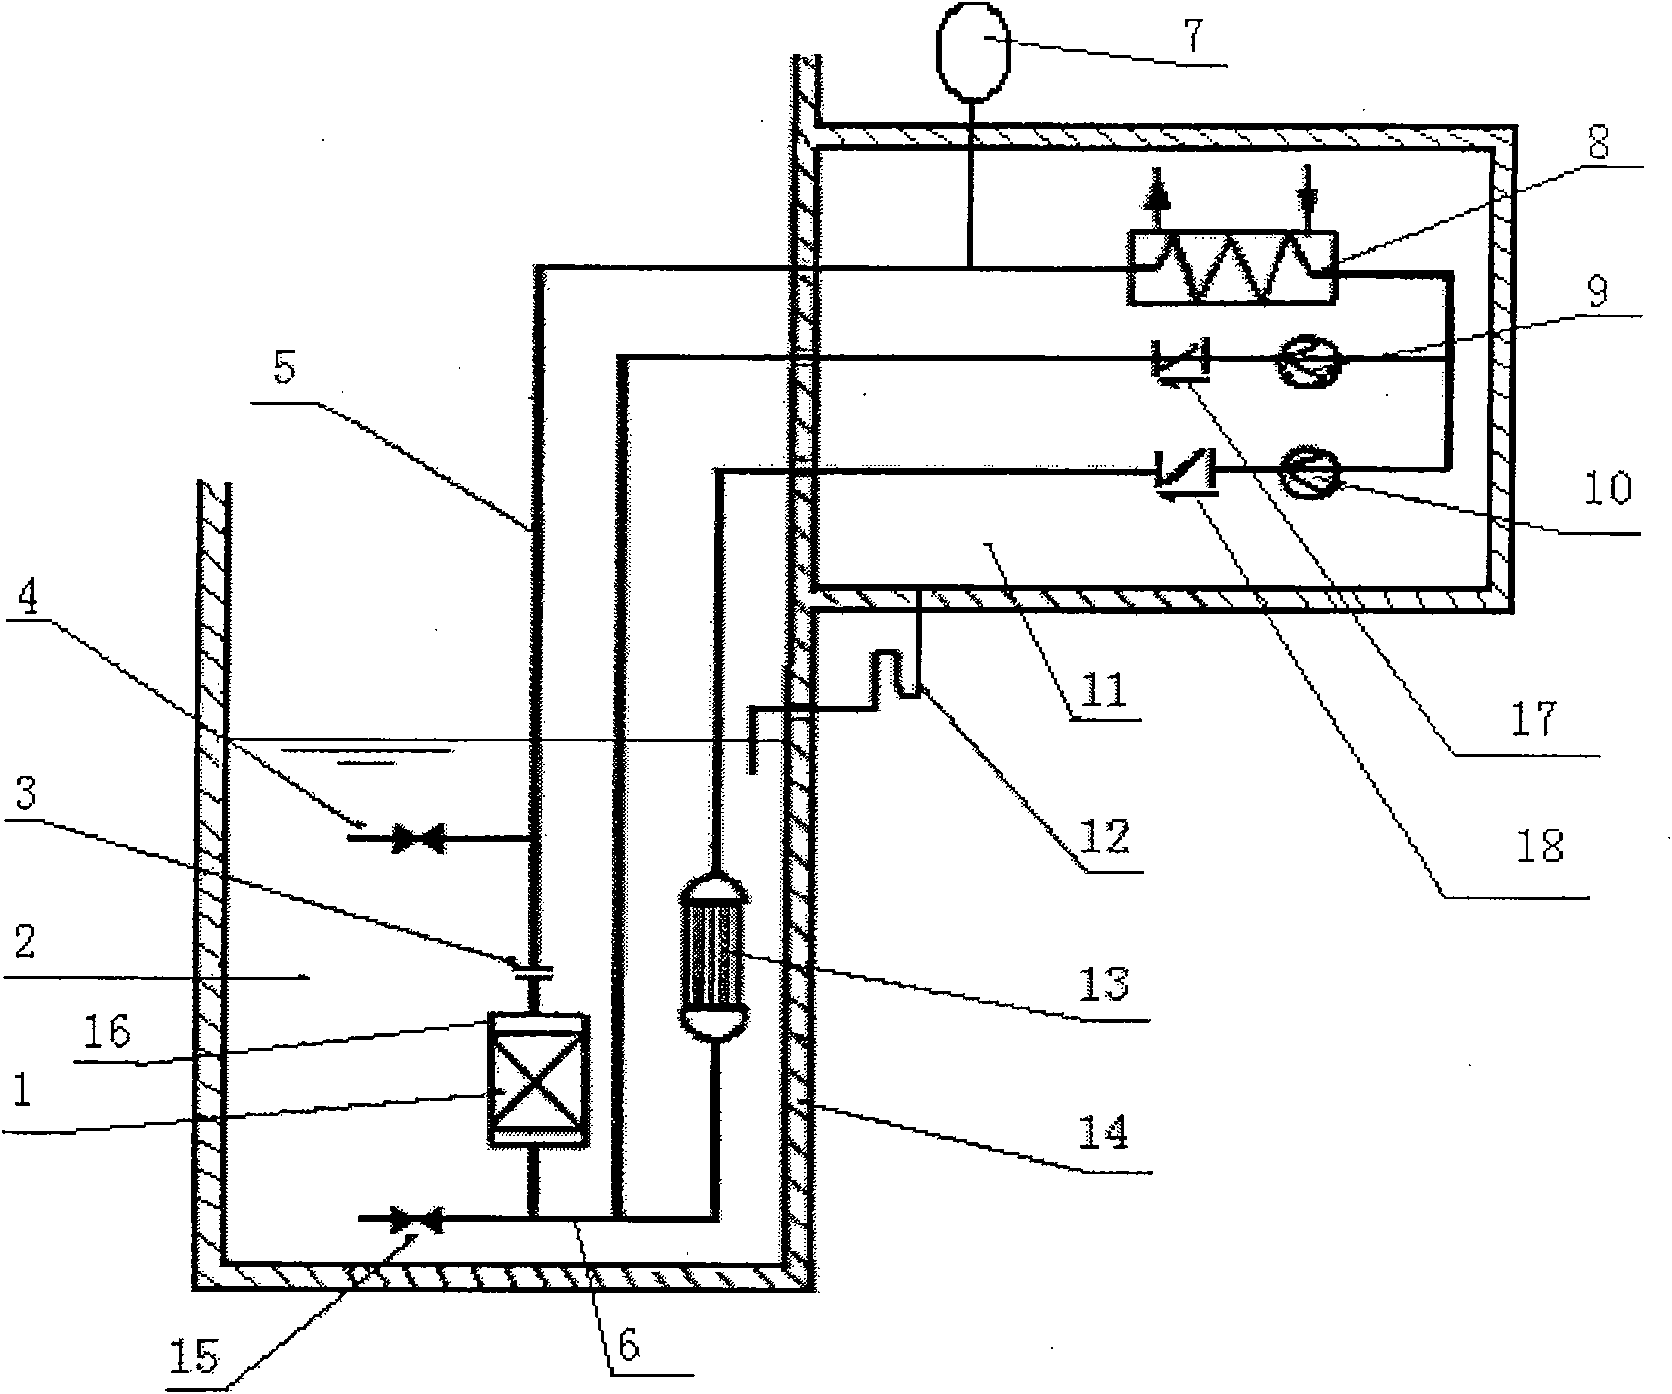 Non-kinetic inherently safe tube-pool type reactor